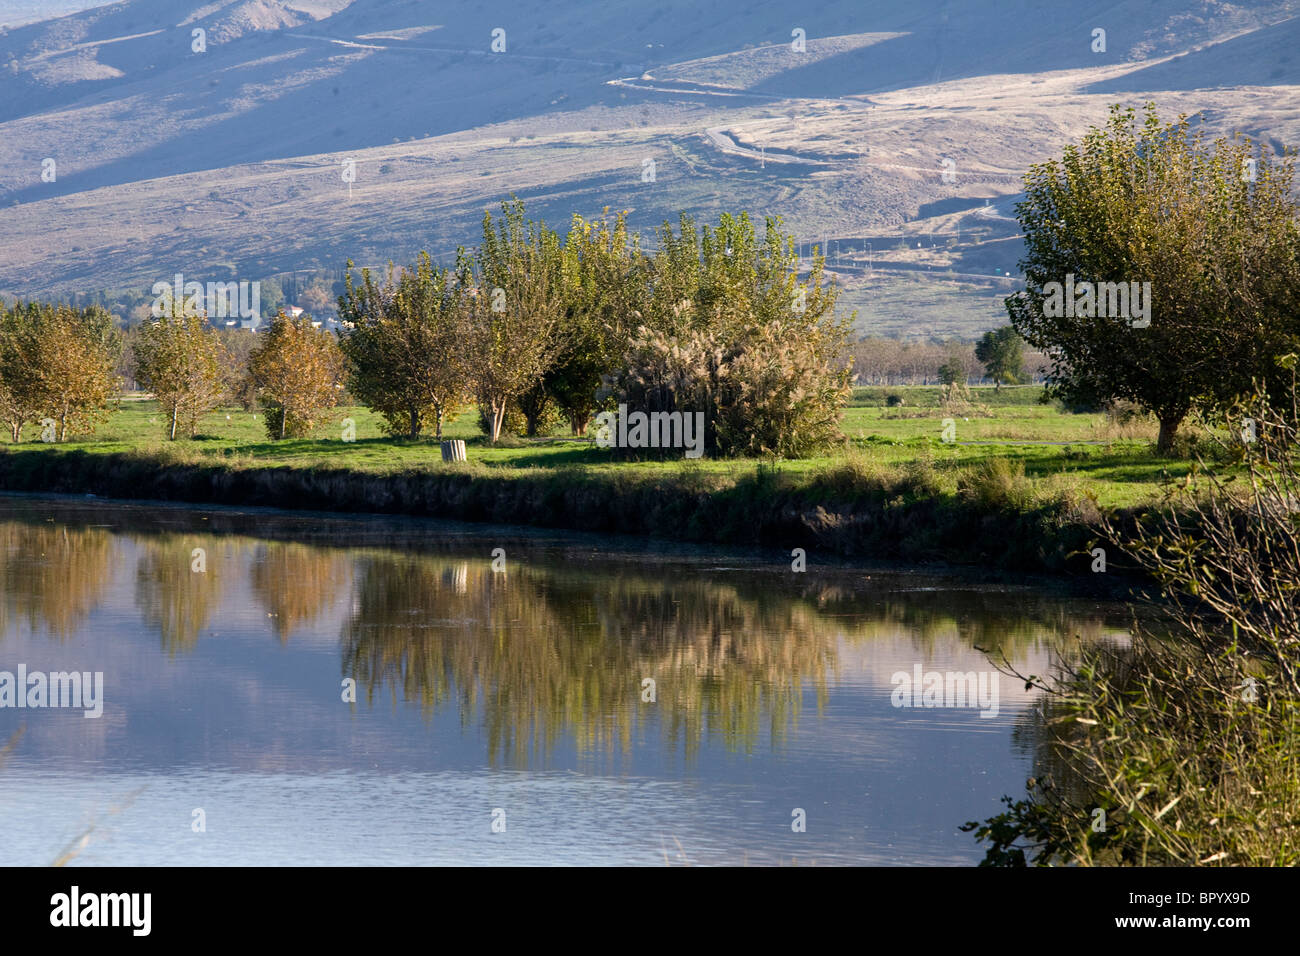 Photograph of the landscape of the Upper Galilee Stock Photo